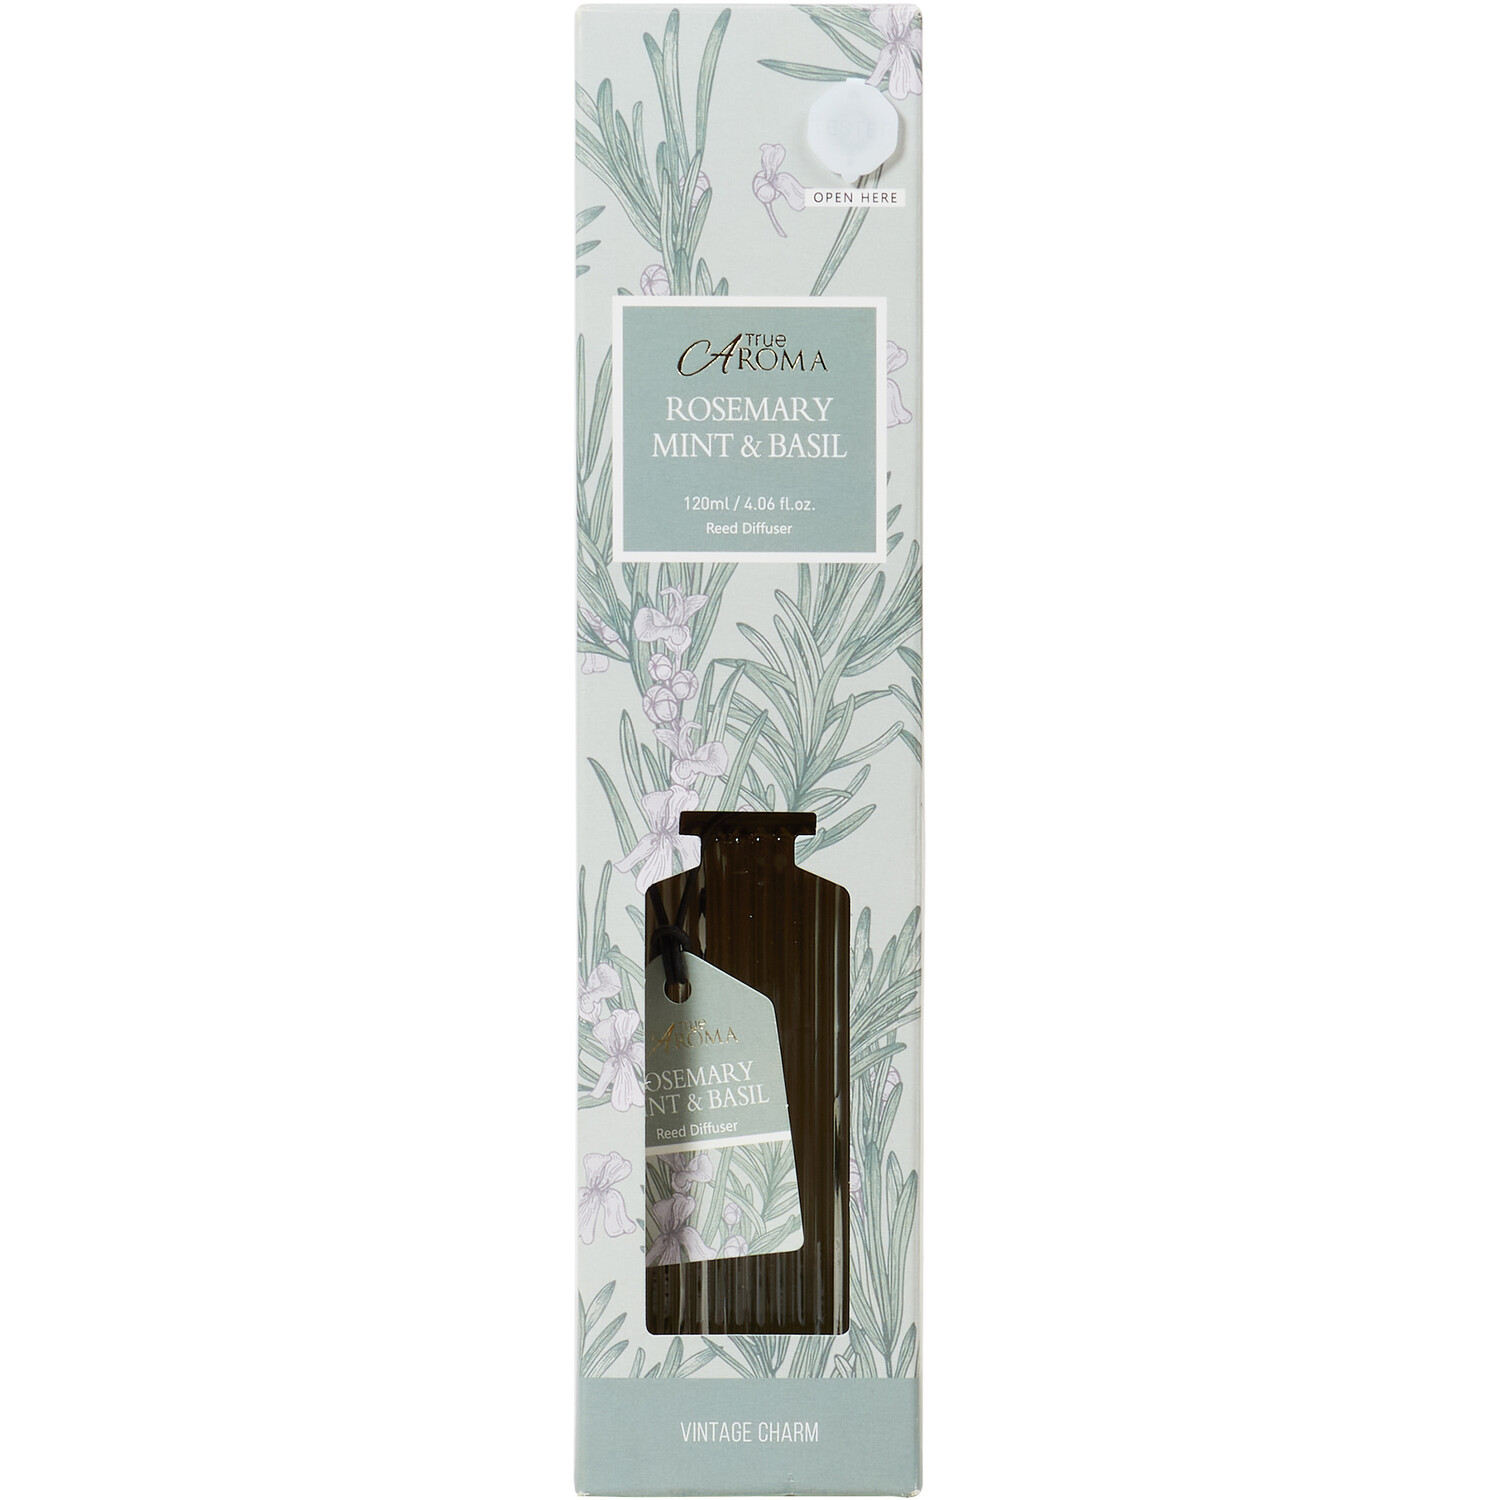 Rosemary Mint & Basil Diffuser 120ml - Clear Image 1